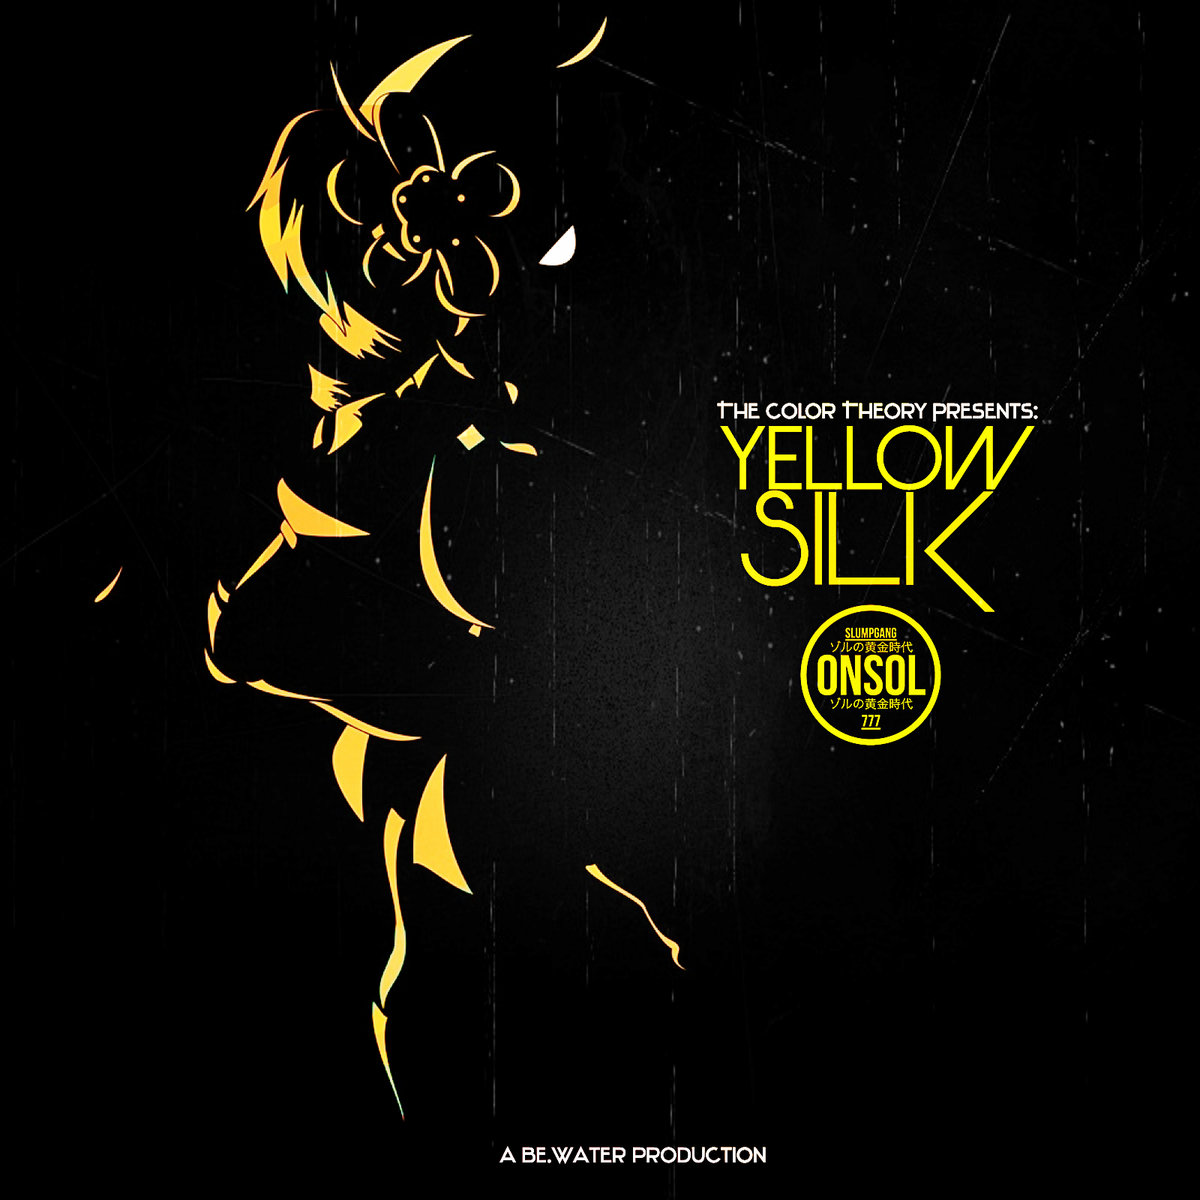 BE.water - "The Color Theory Presents: Yellow Silk" (Release)